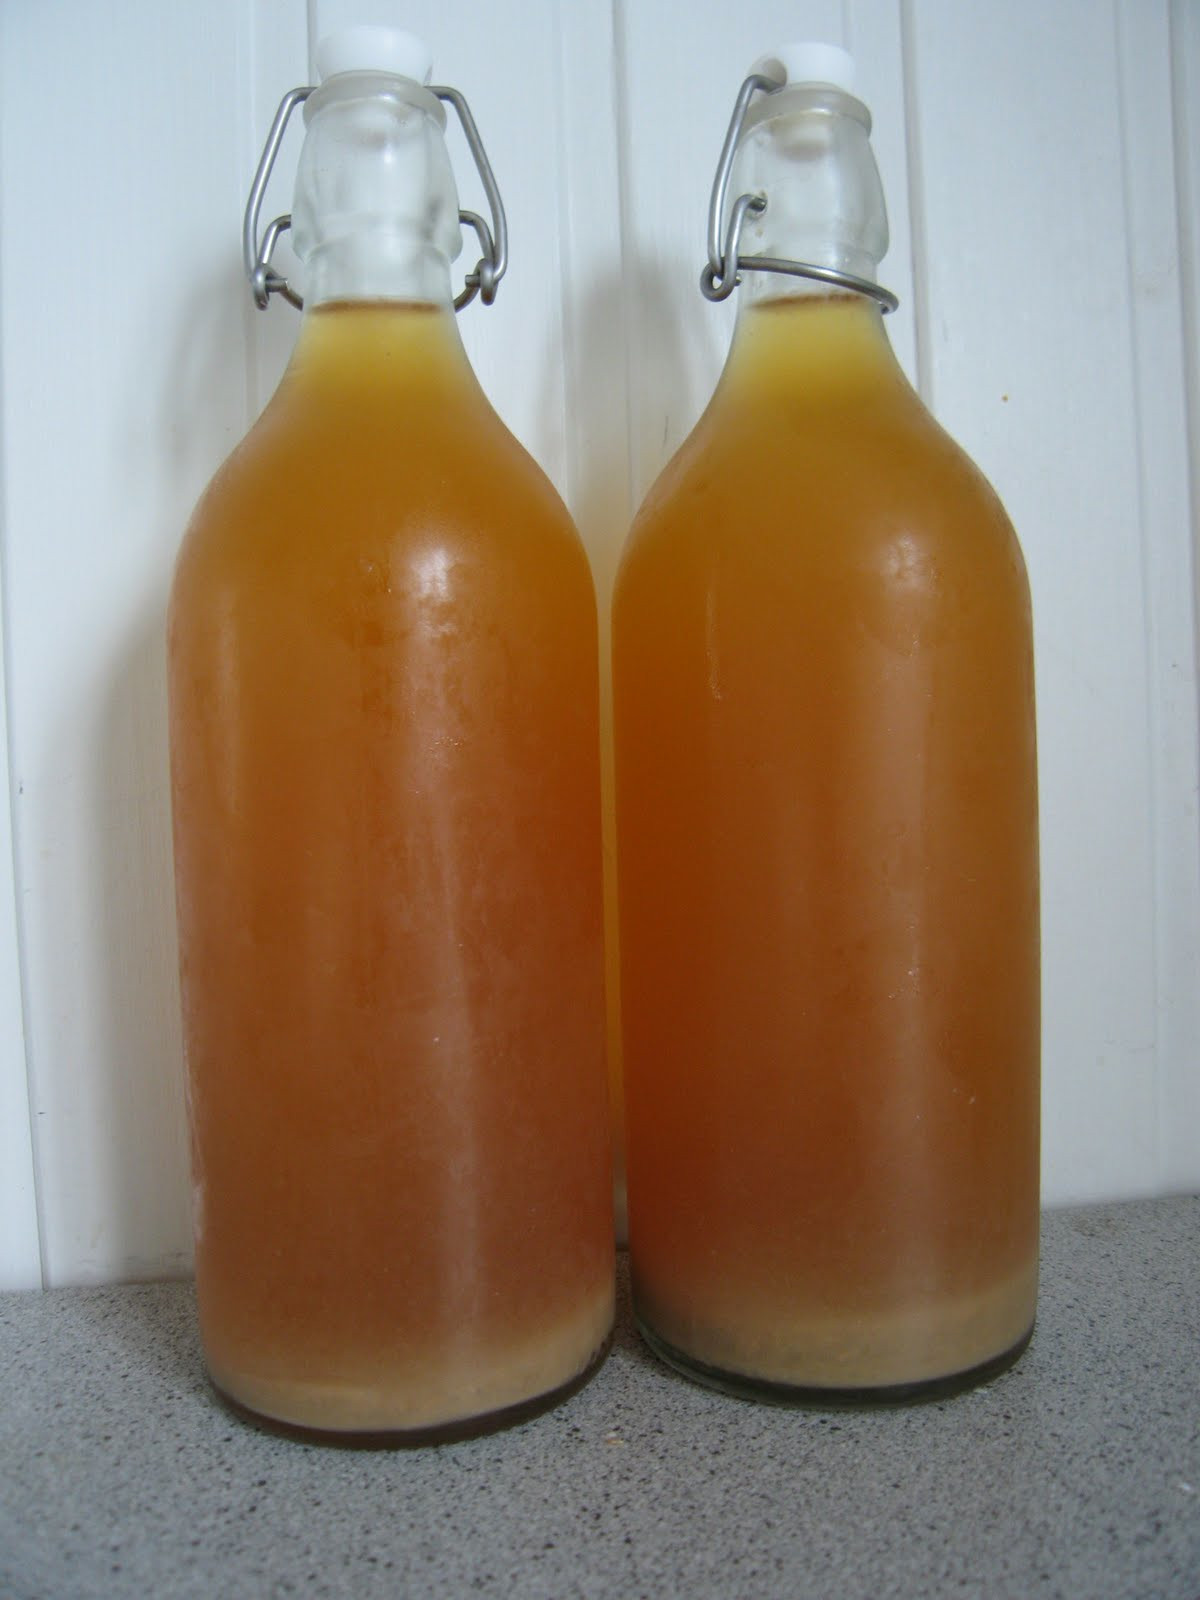 Best ideas about DIY Ginger Beer
. Save or Pin DIY ginger beer recipes Now.